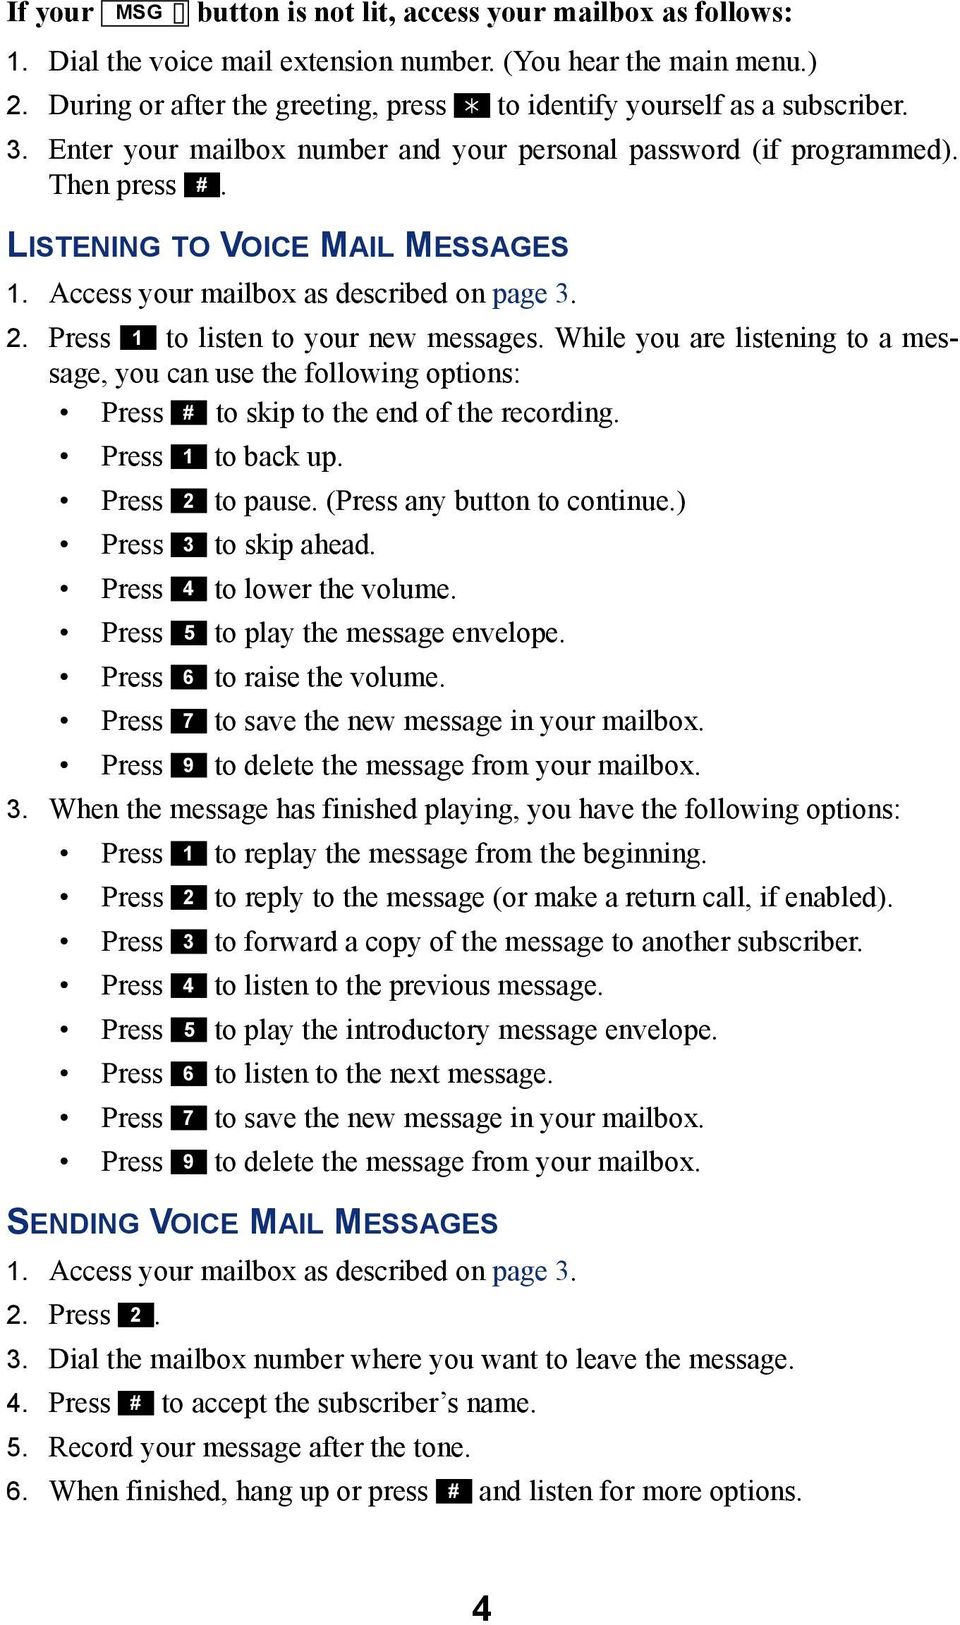 Access your mailbox as described on page 3. 2. Press 1 to listen to your new messages.